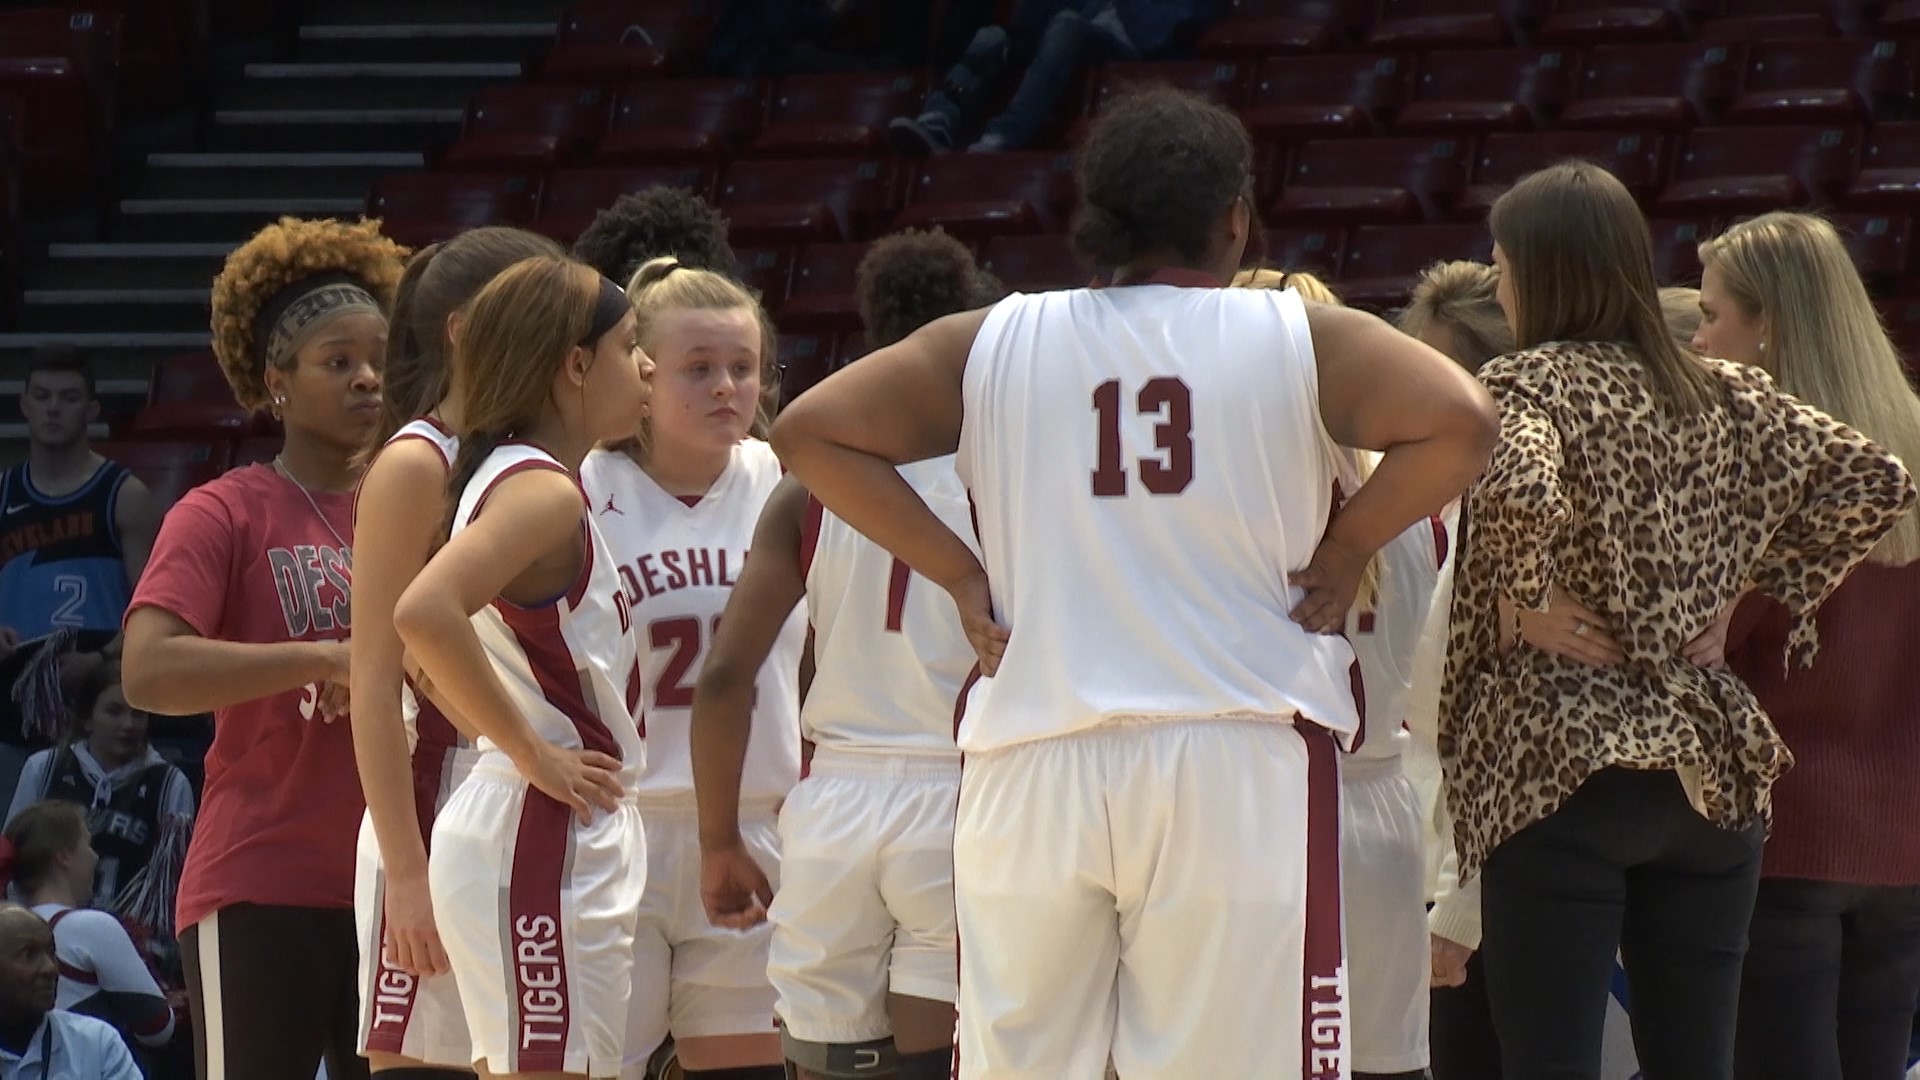 Deshler's Lady Tigers sank 11 3-point goals Tuesday night the Class 4A semifinals en route to a 64-52 victory over Sumter Central in the 98th AHSAA State Basketball